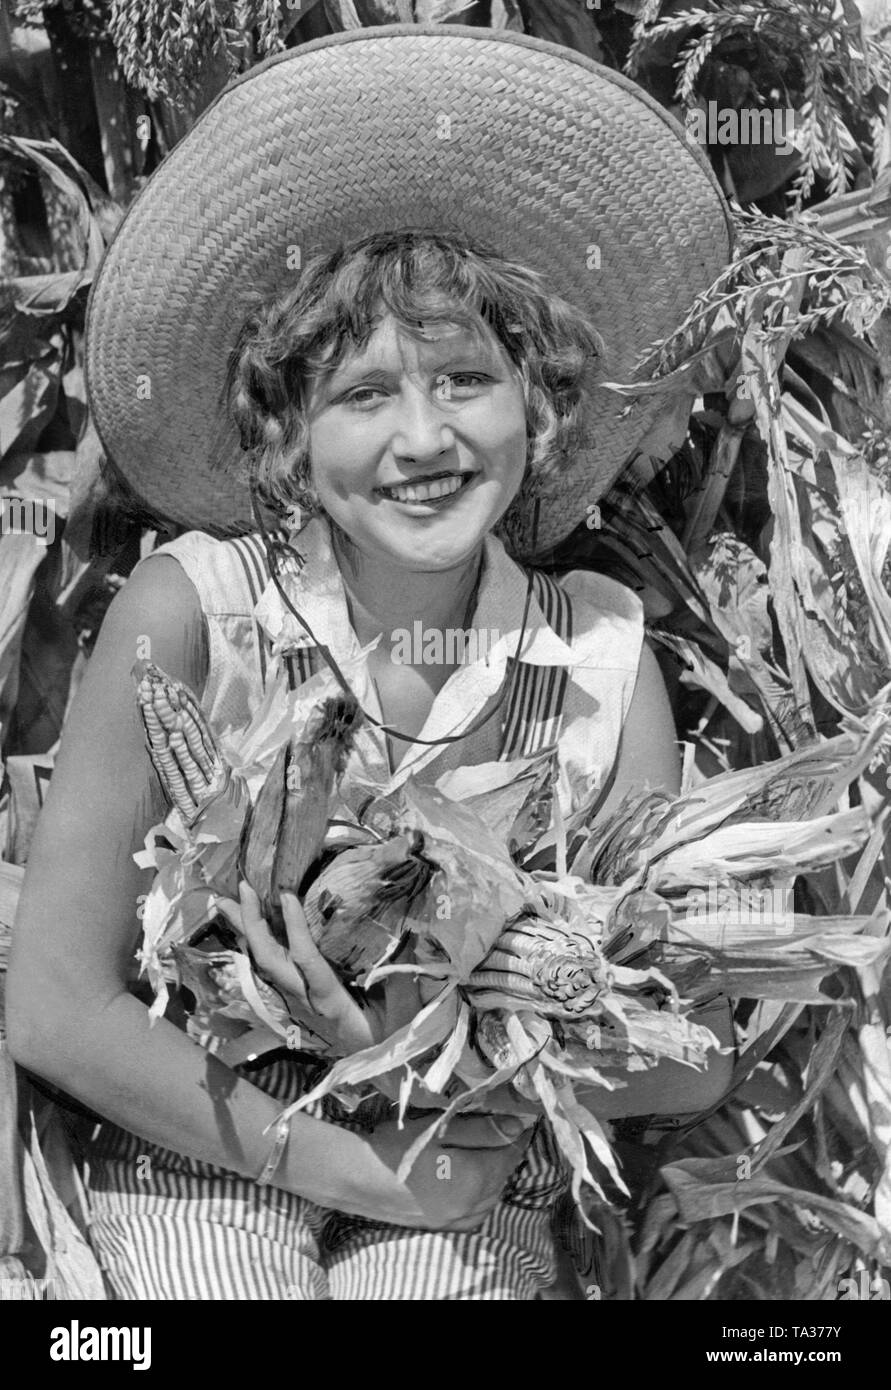 Miss Maurine Hamman, winner of the 'American Champion Farm Girl' agricultural contest at the Los Angeles Country Fair in Pomona. Here she is peeling corn. Stock Photo